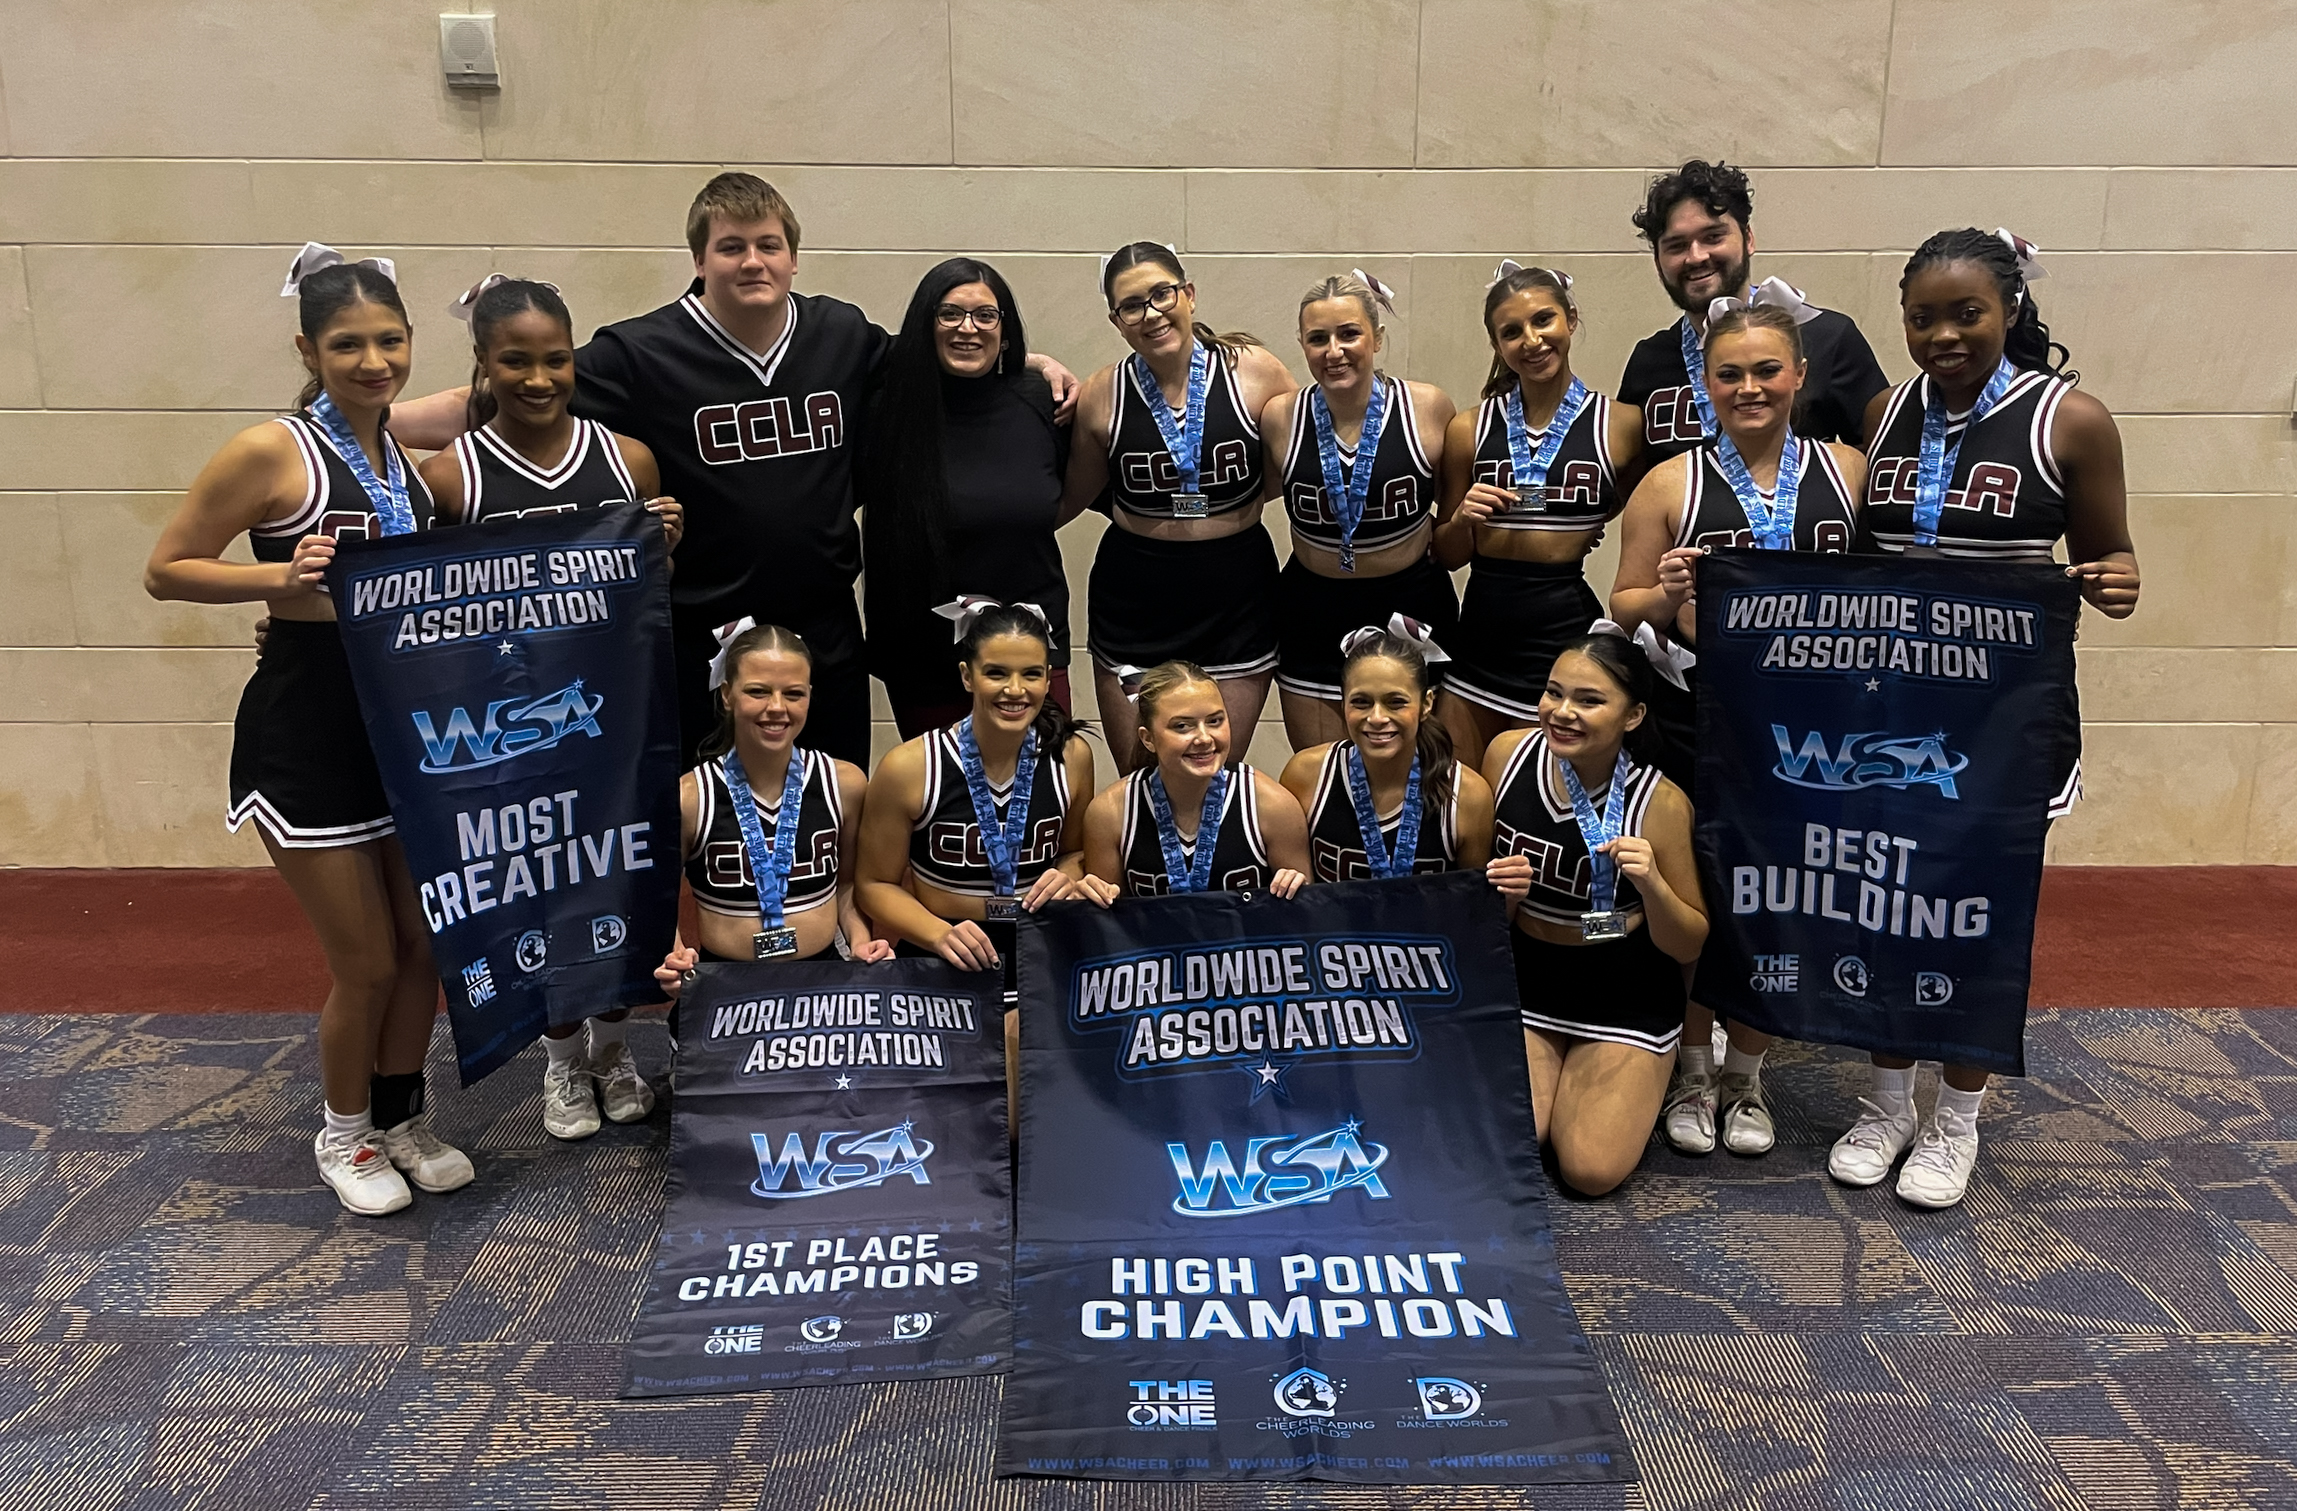 Cheer Shines At Worldwide Spirit Association Competition